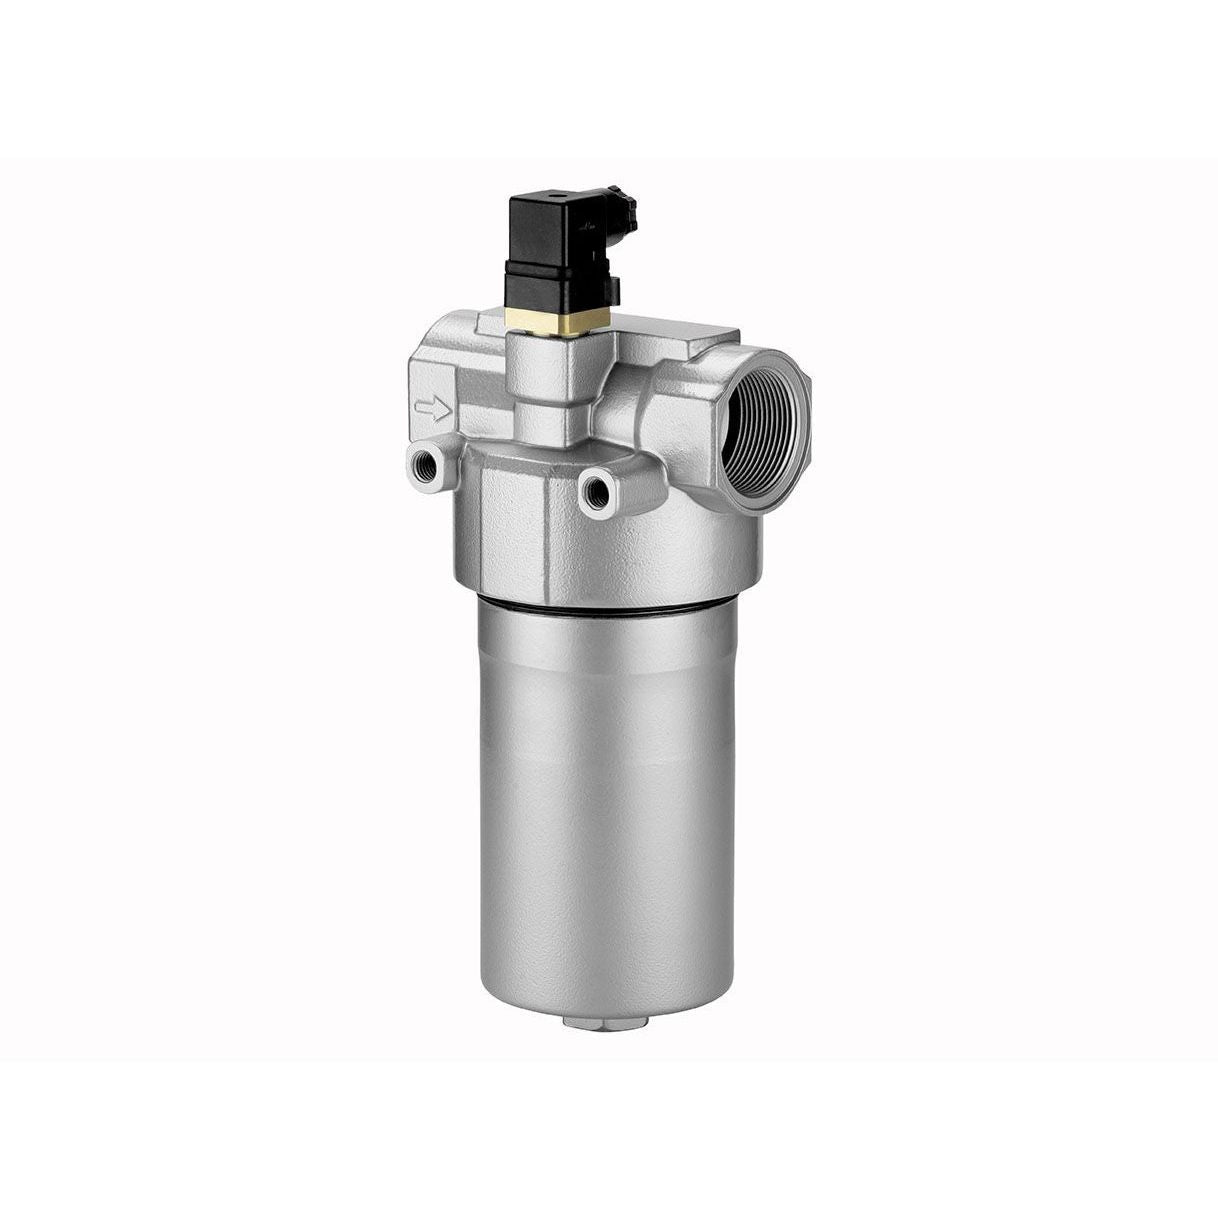 D 332-756 OD1 : Argo Pressure Filter,  1450psi, 73GPM, 10 Micron, #12SAE, With Ind., With Bypass